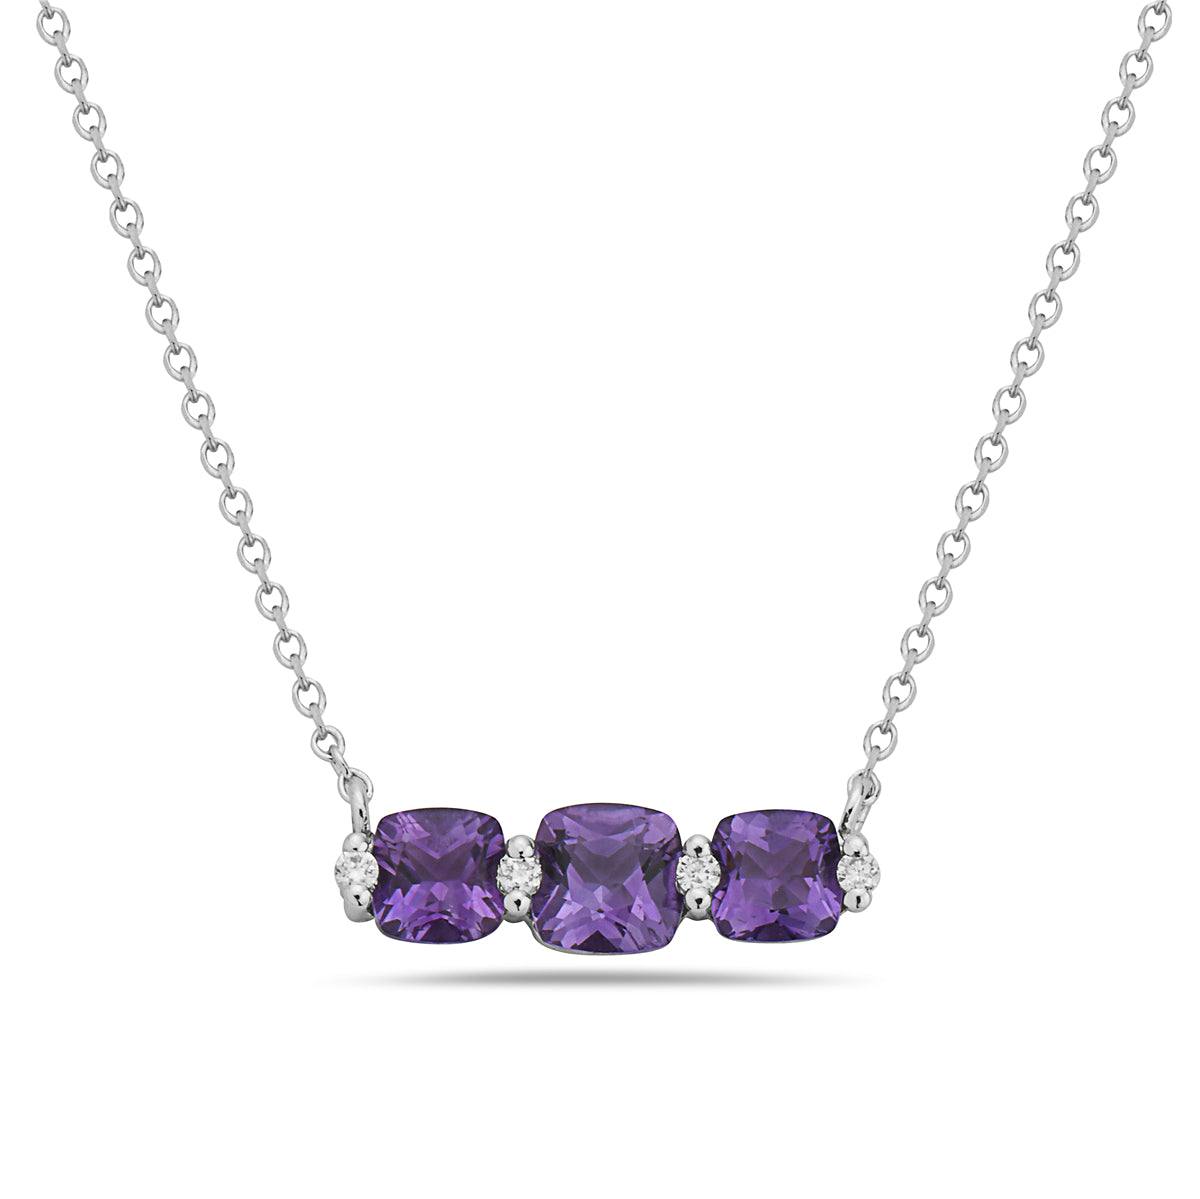 AMETHYST AND DIAMOND NECKLACE